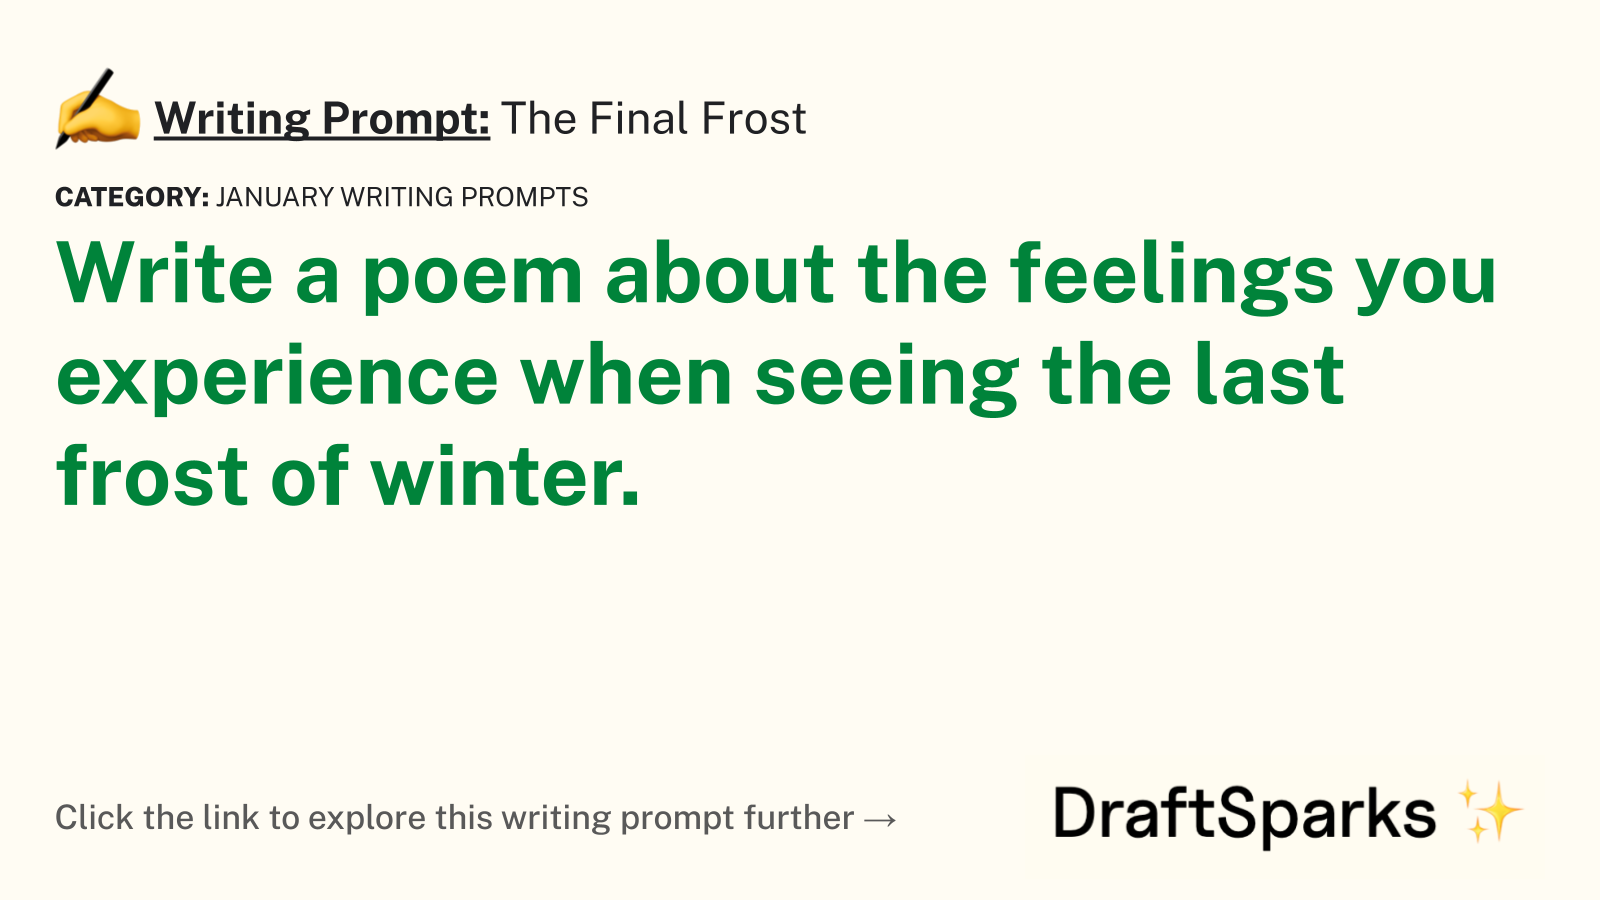 The Final Frost